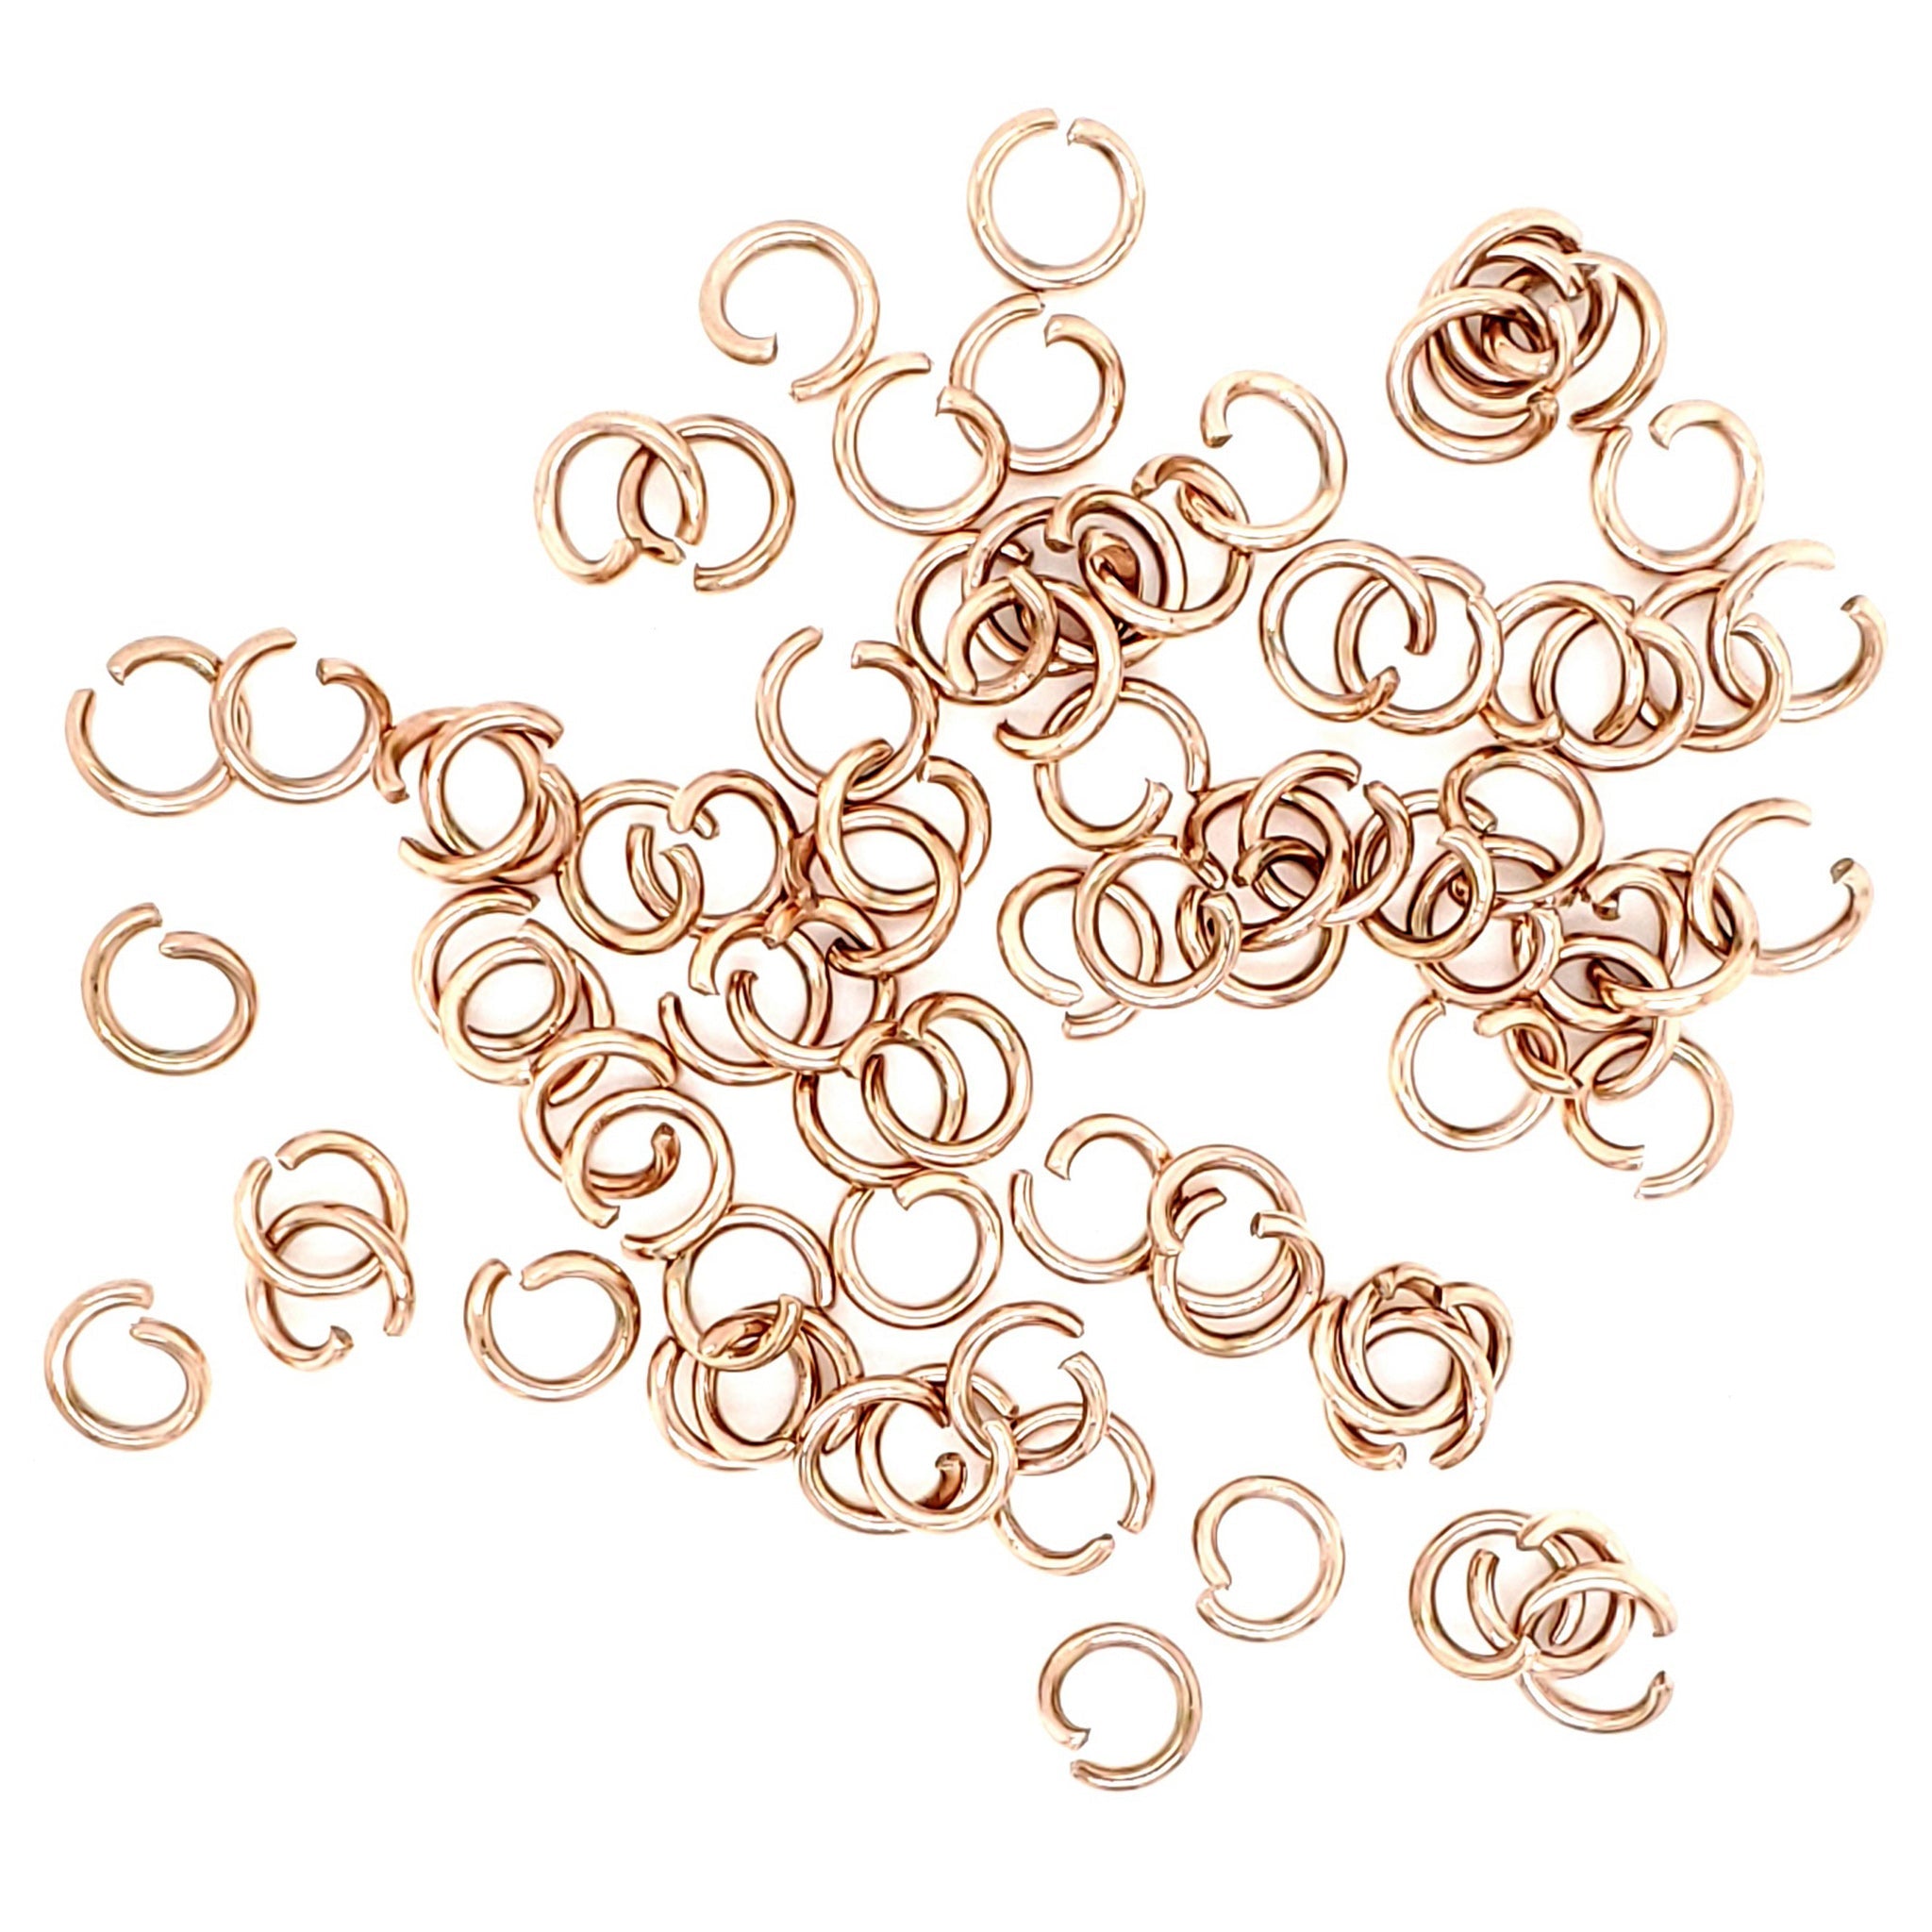 Stainless Steel Rose Gold Saw Cut Jump Rings 100 Pk Enc0005